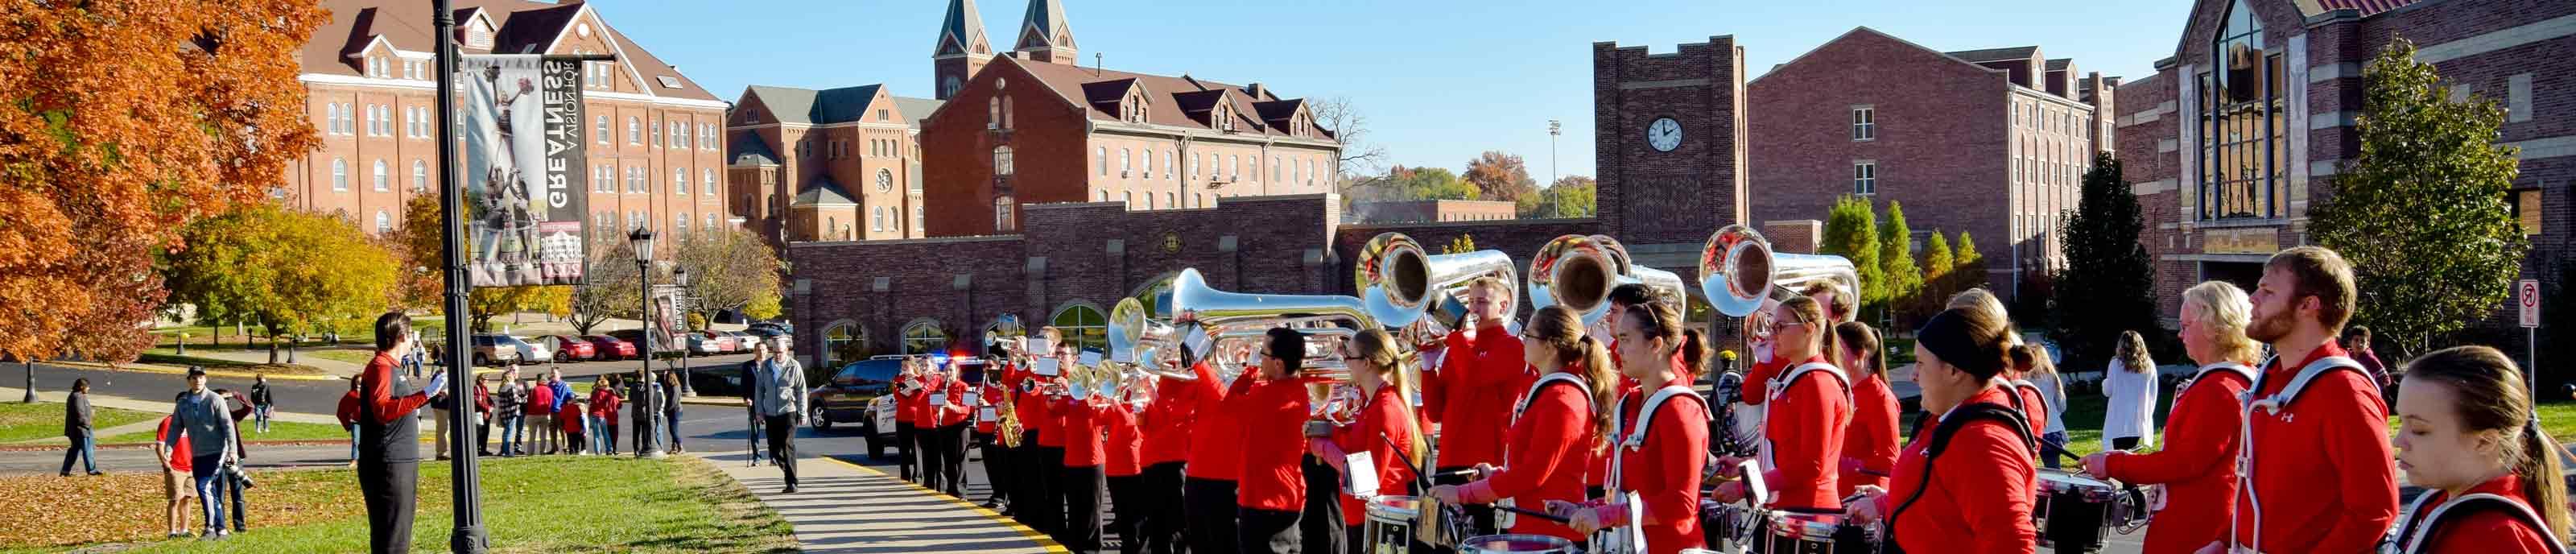 The Raven Regiment, Benedictine College's Marching Band, plays at a homecoming event